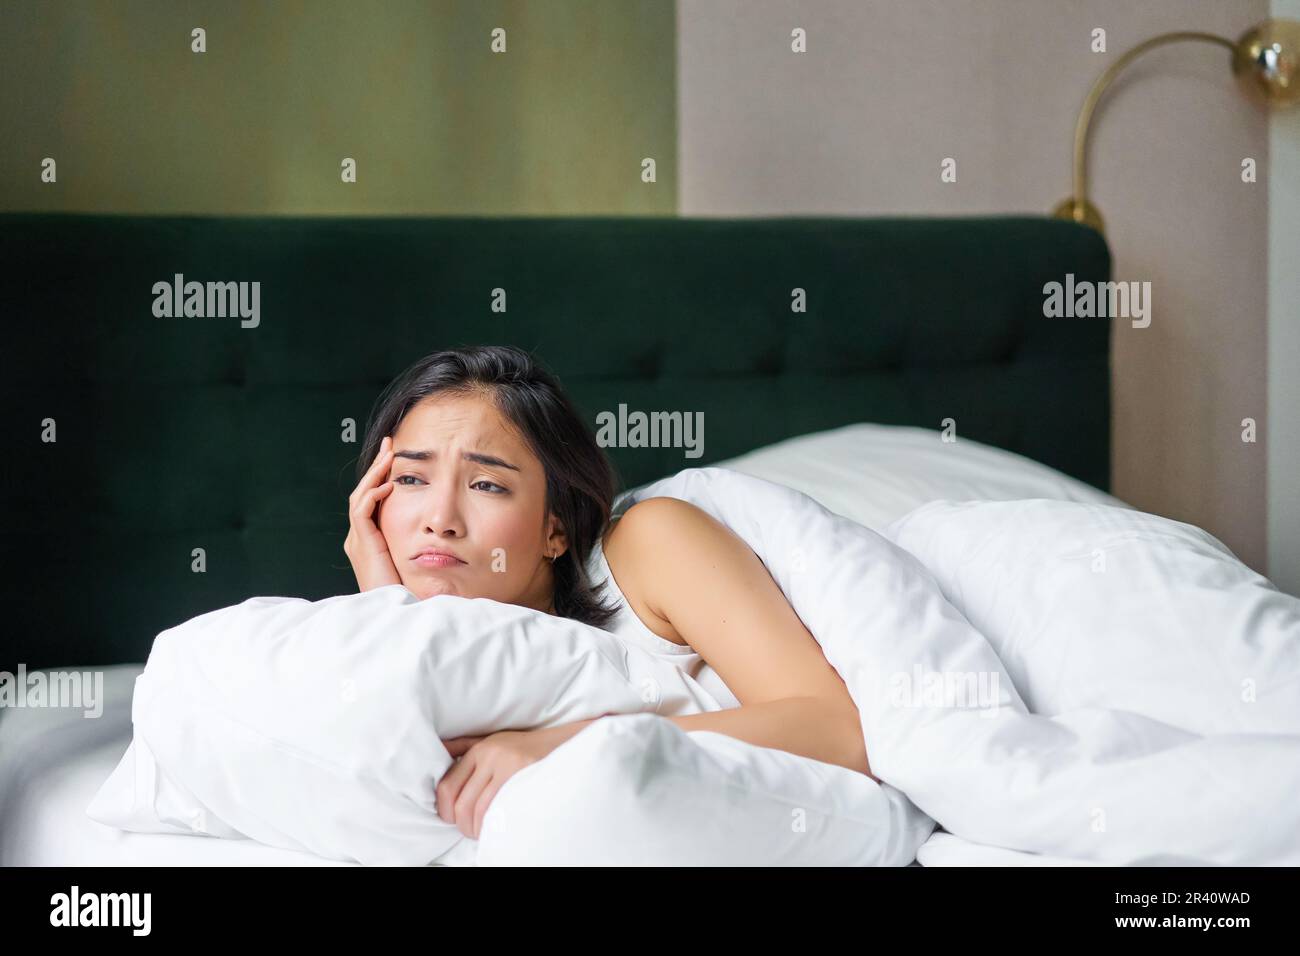 Portrait of upset korean woman, asian girl lying in bed feels sad, covers herself with duvet, looks outside window with disappoi Stock Photo